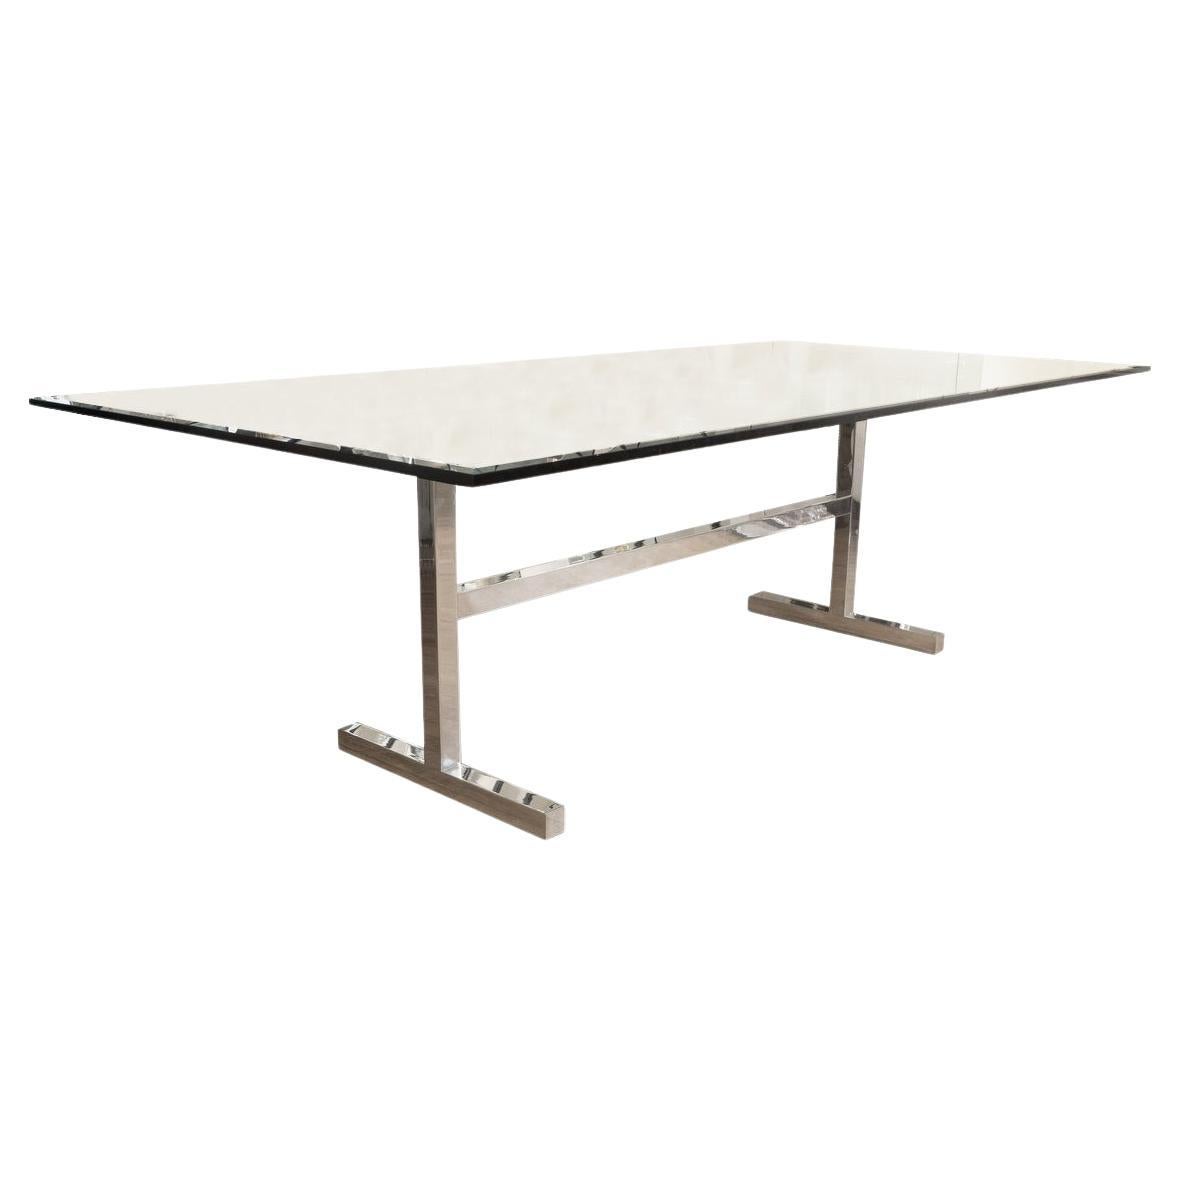 Rectangular glass and nickel dinning table